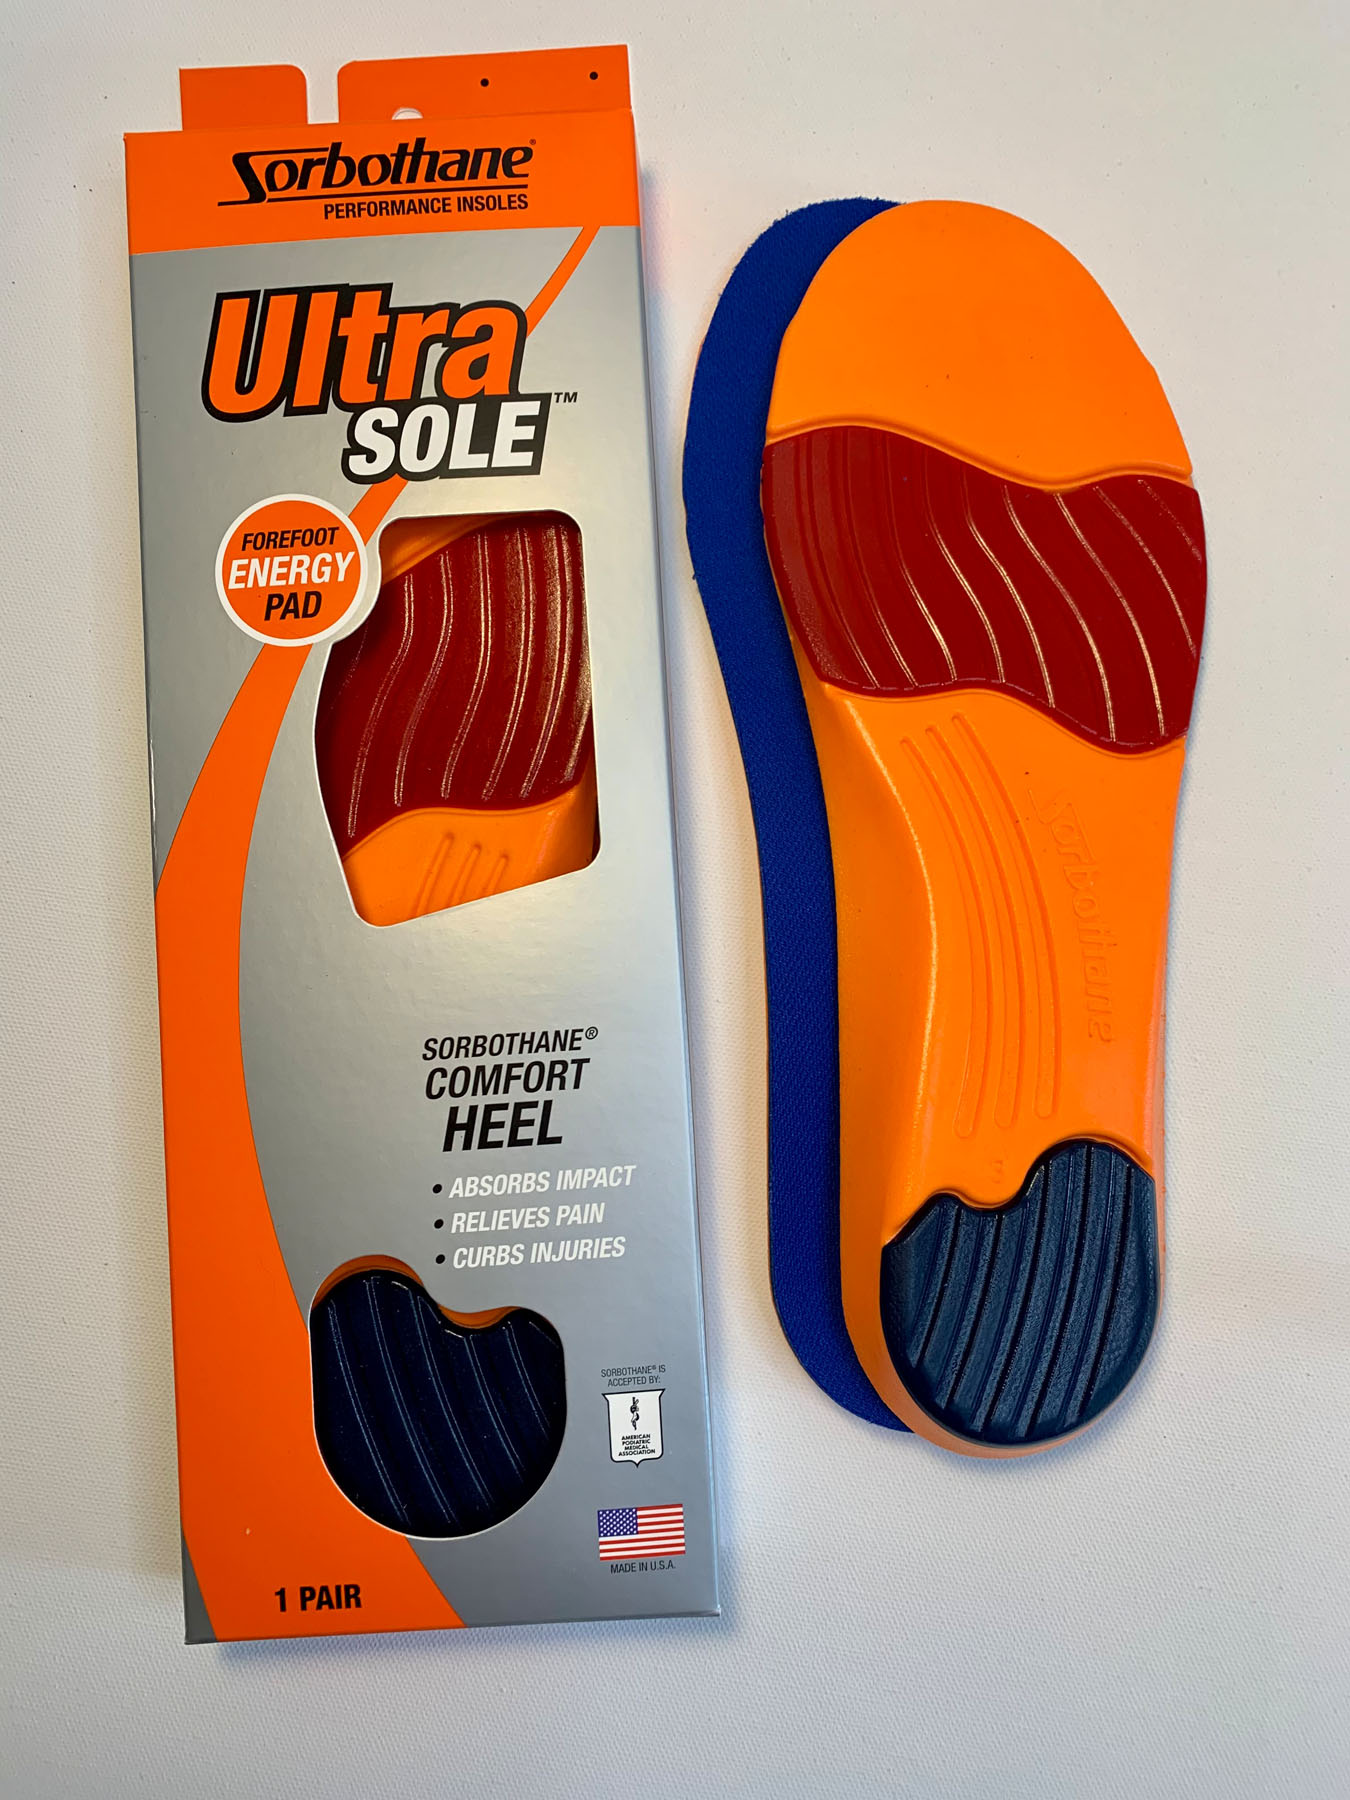 A picture containing Sorbothane Ultra SOLE Insole